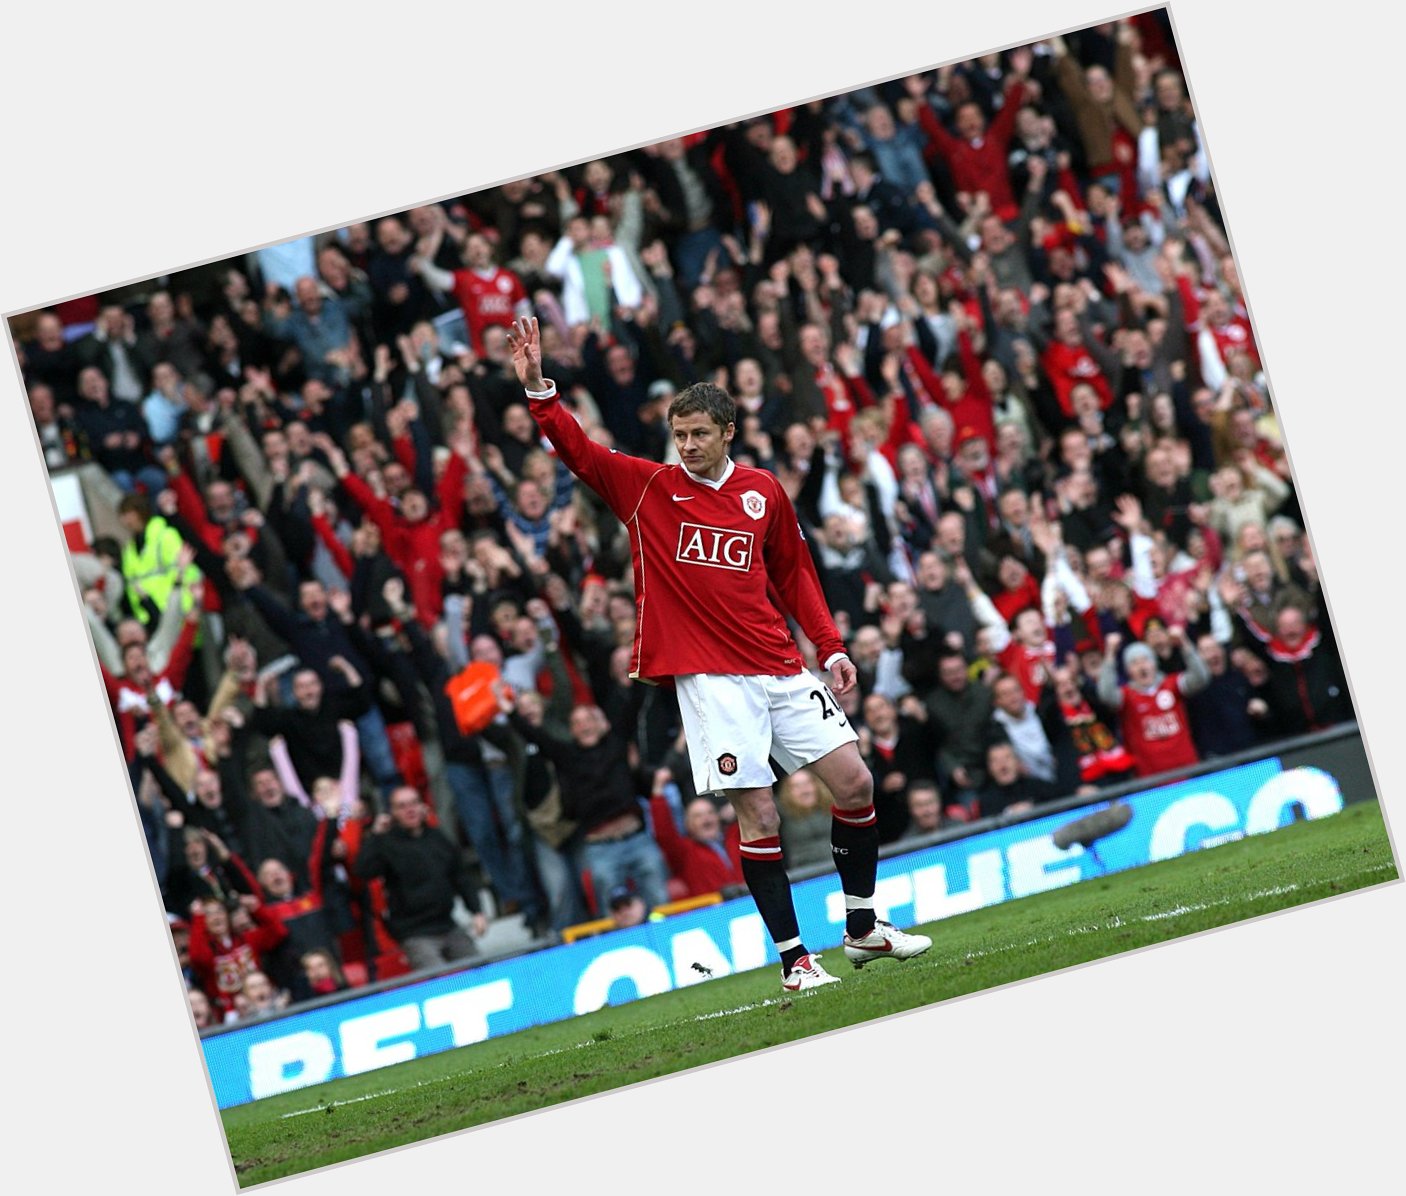 Happy birthday, Ole Gunnar Solskjaer! Has there ever been a better super-sub than him...?! 